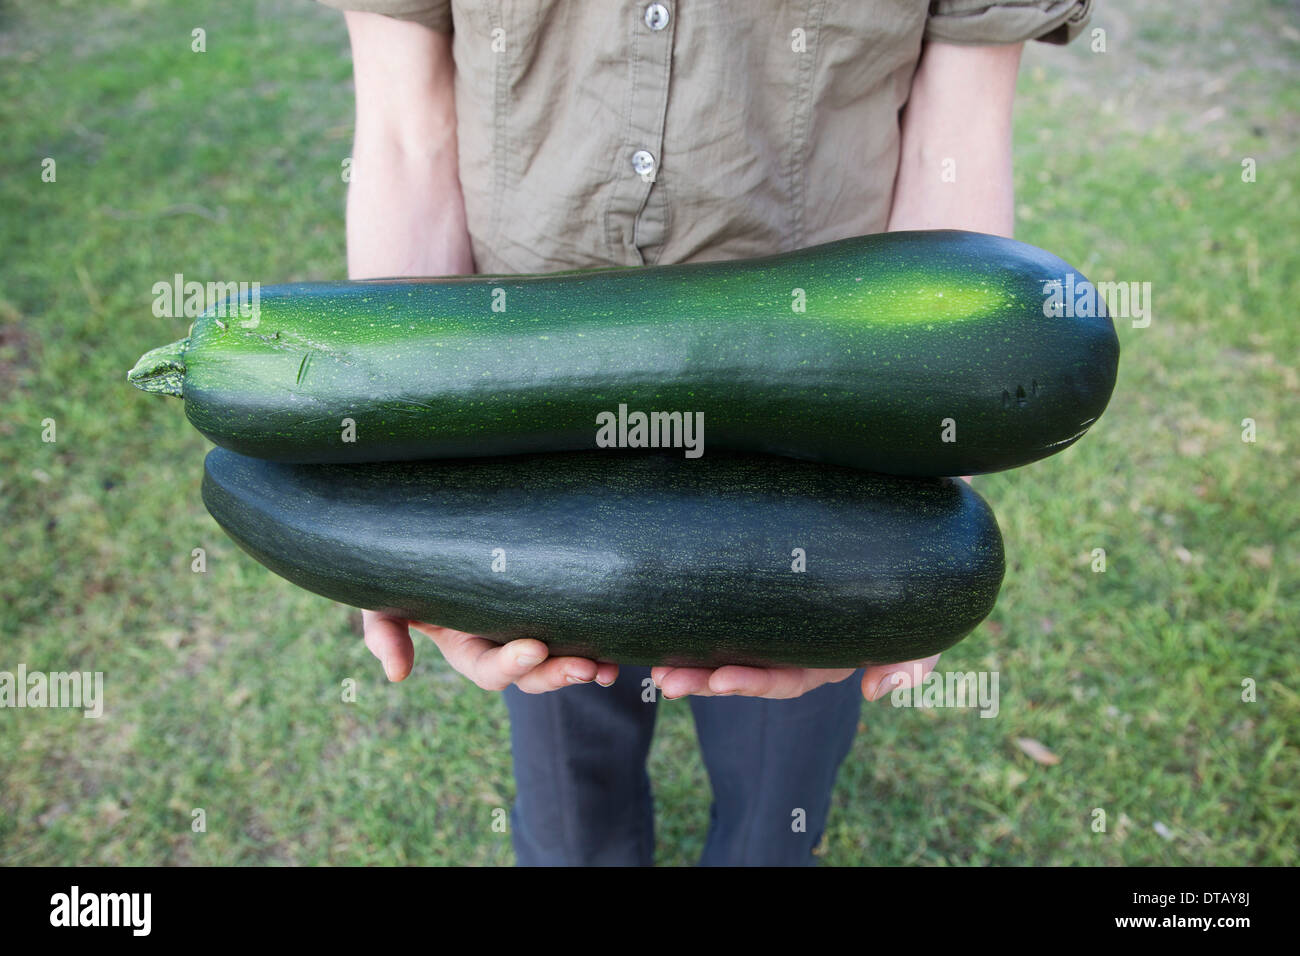 Person holding cucumber, close-up Stock Photo